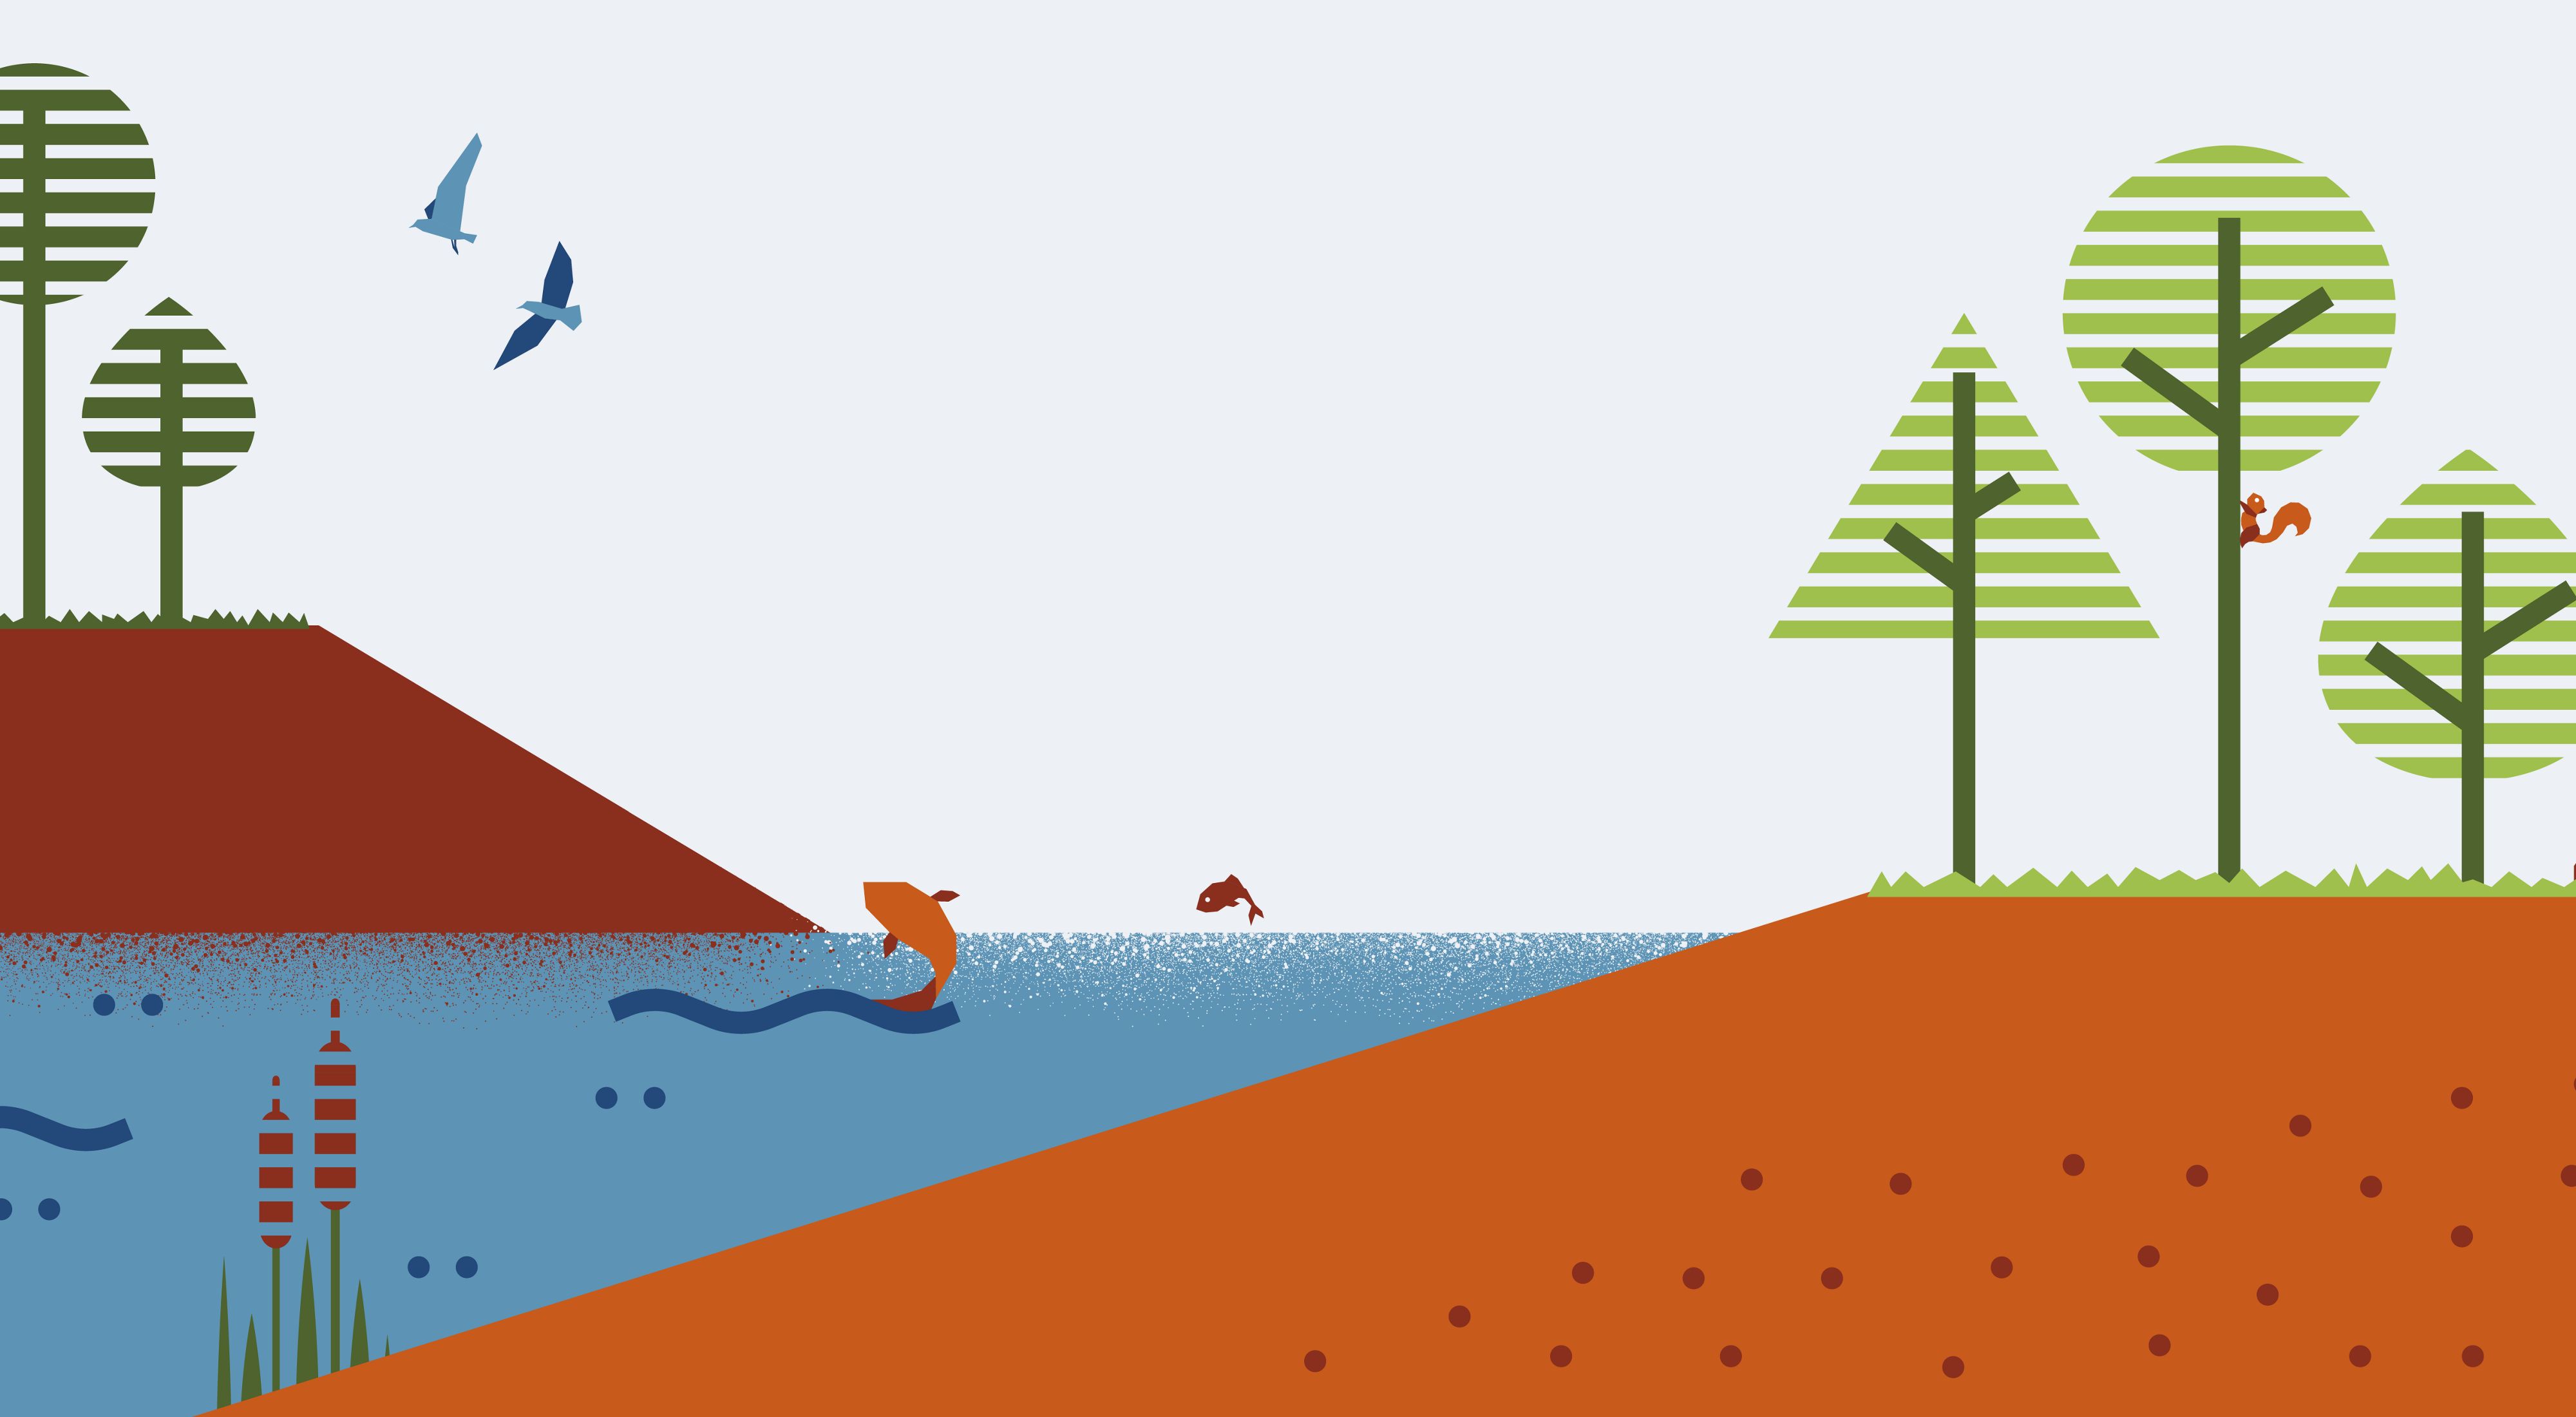 Illustration of trees, water, soil and various wildlife.